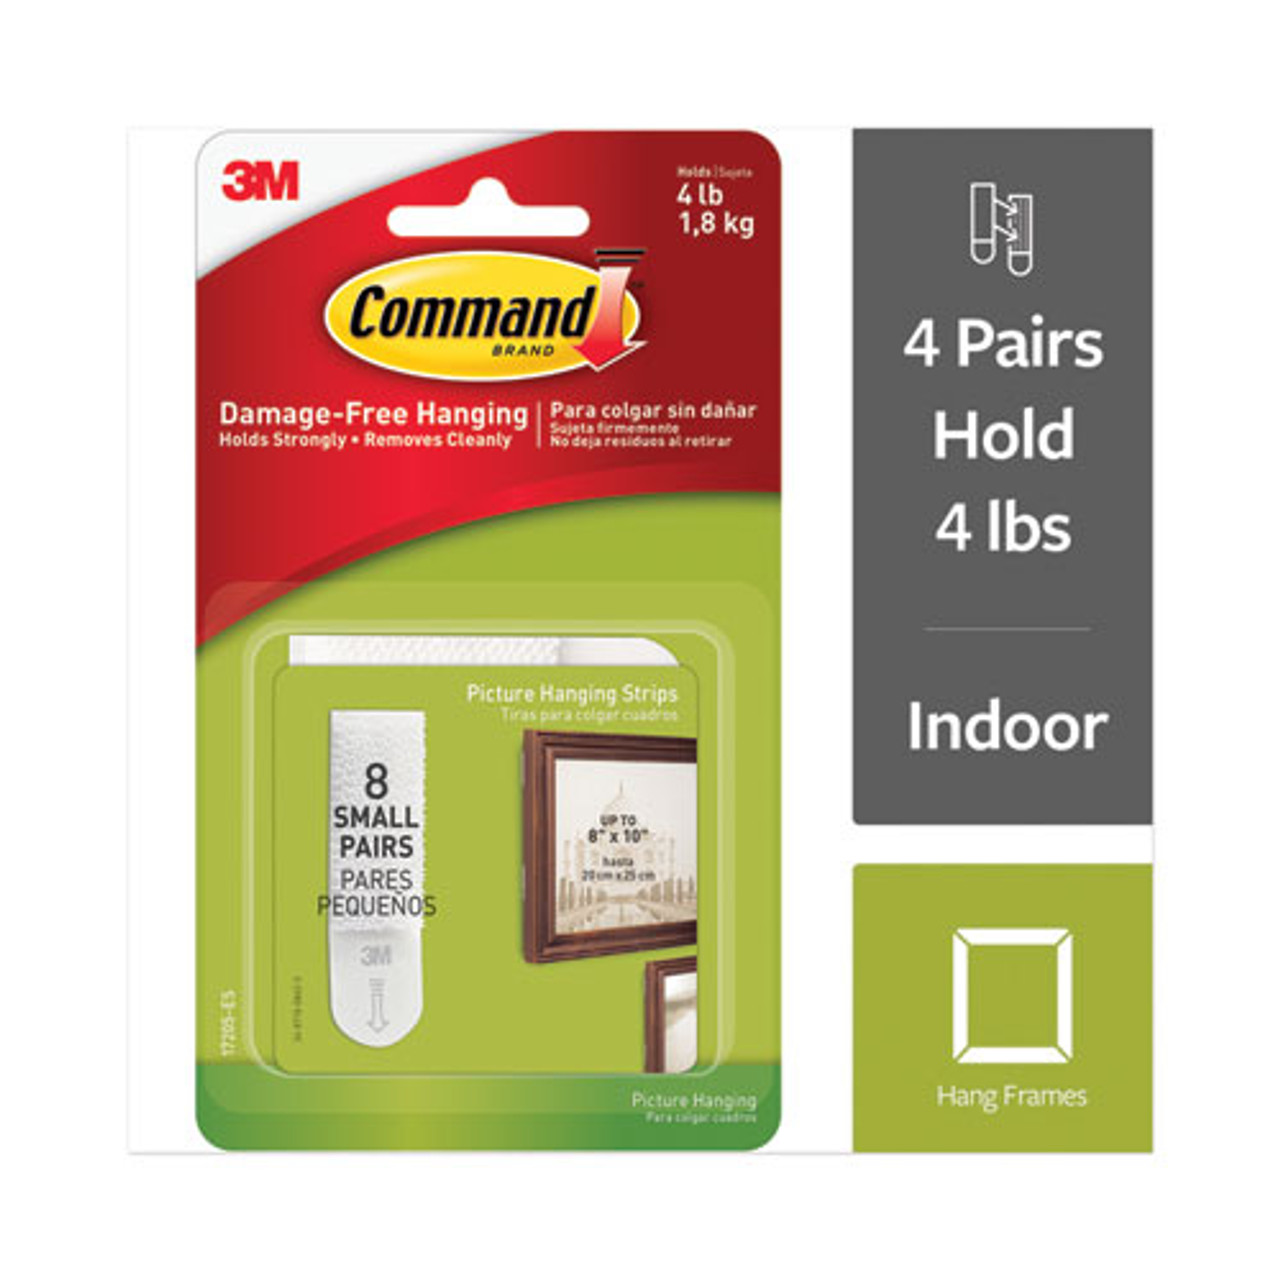 Command Picture Hanging Strips, Small - 8 pairs